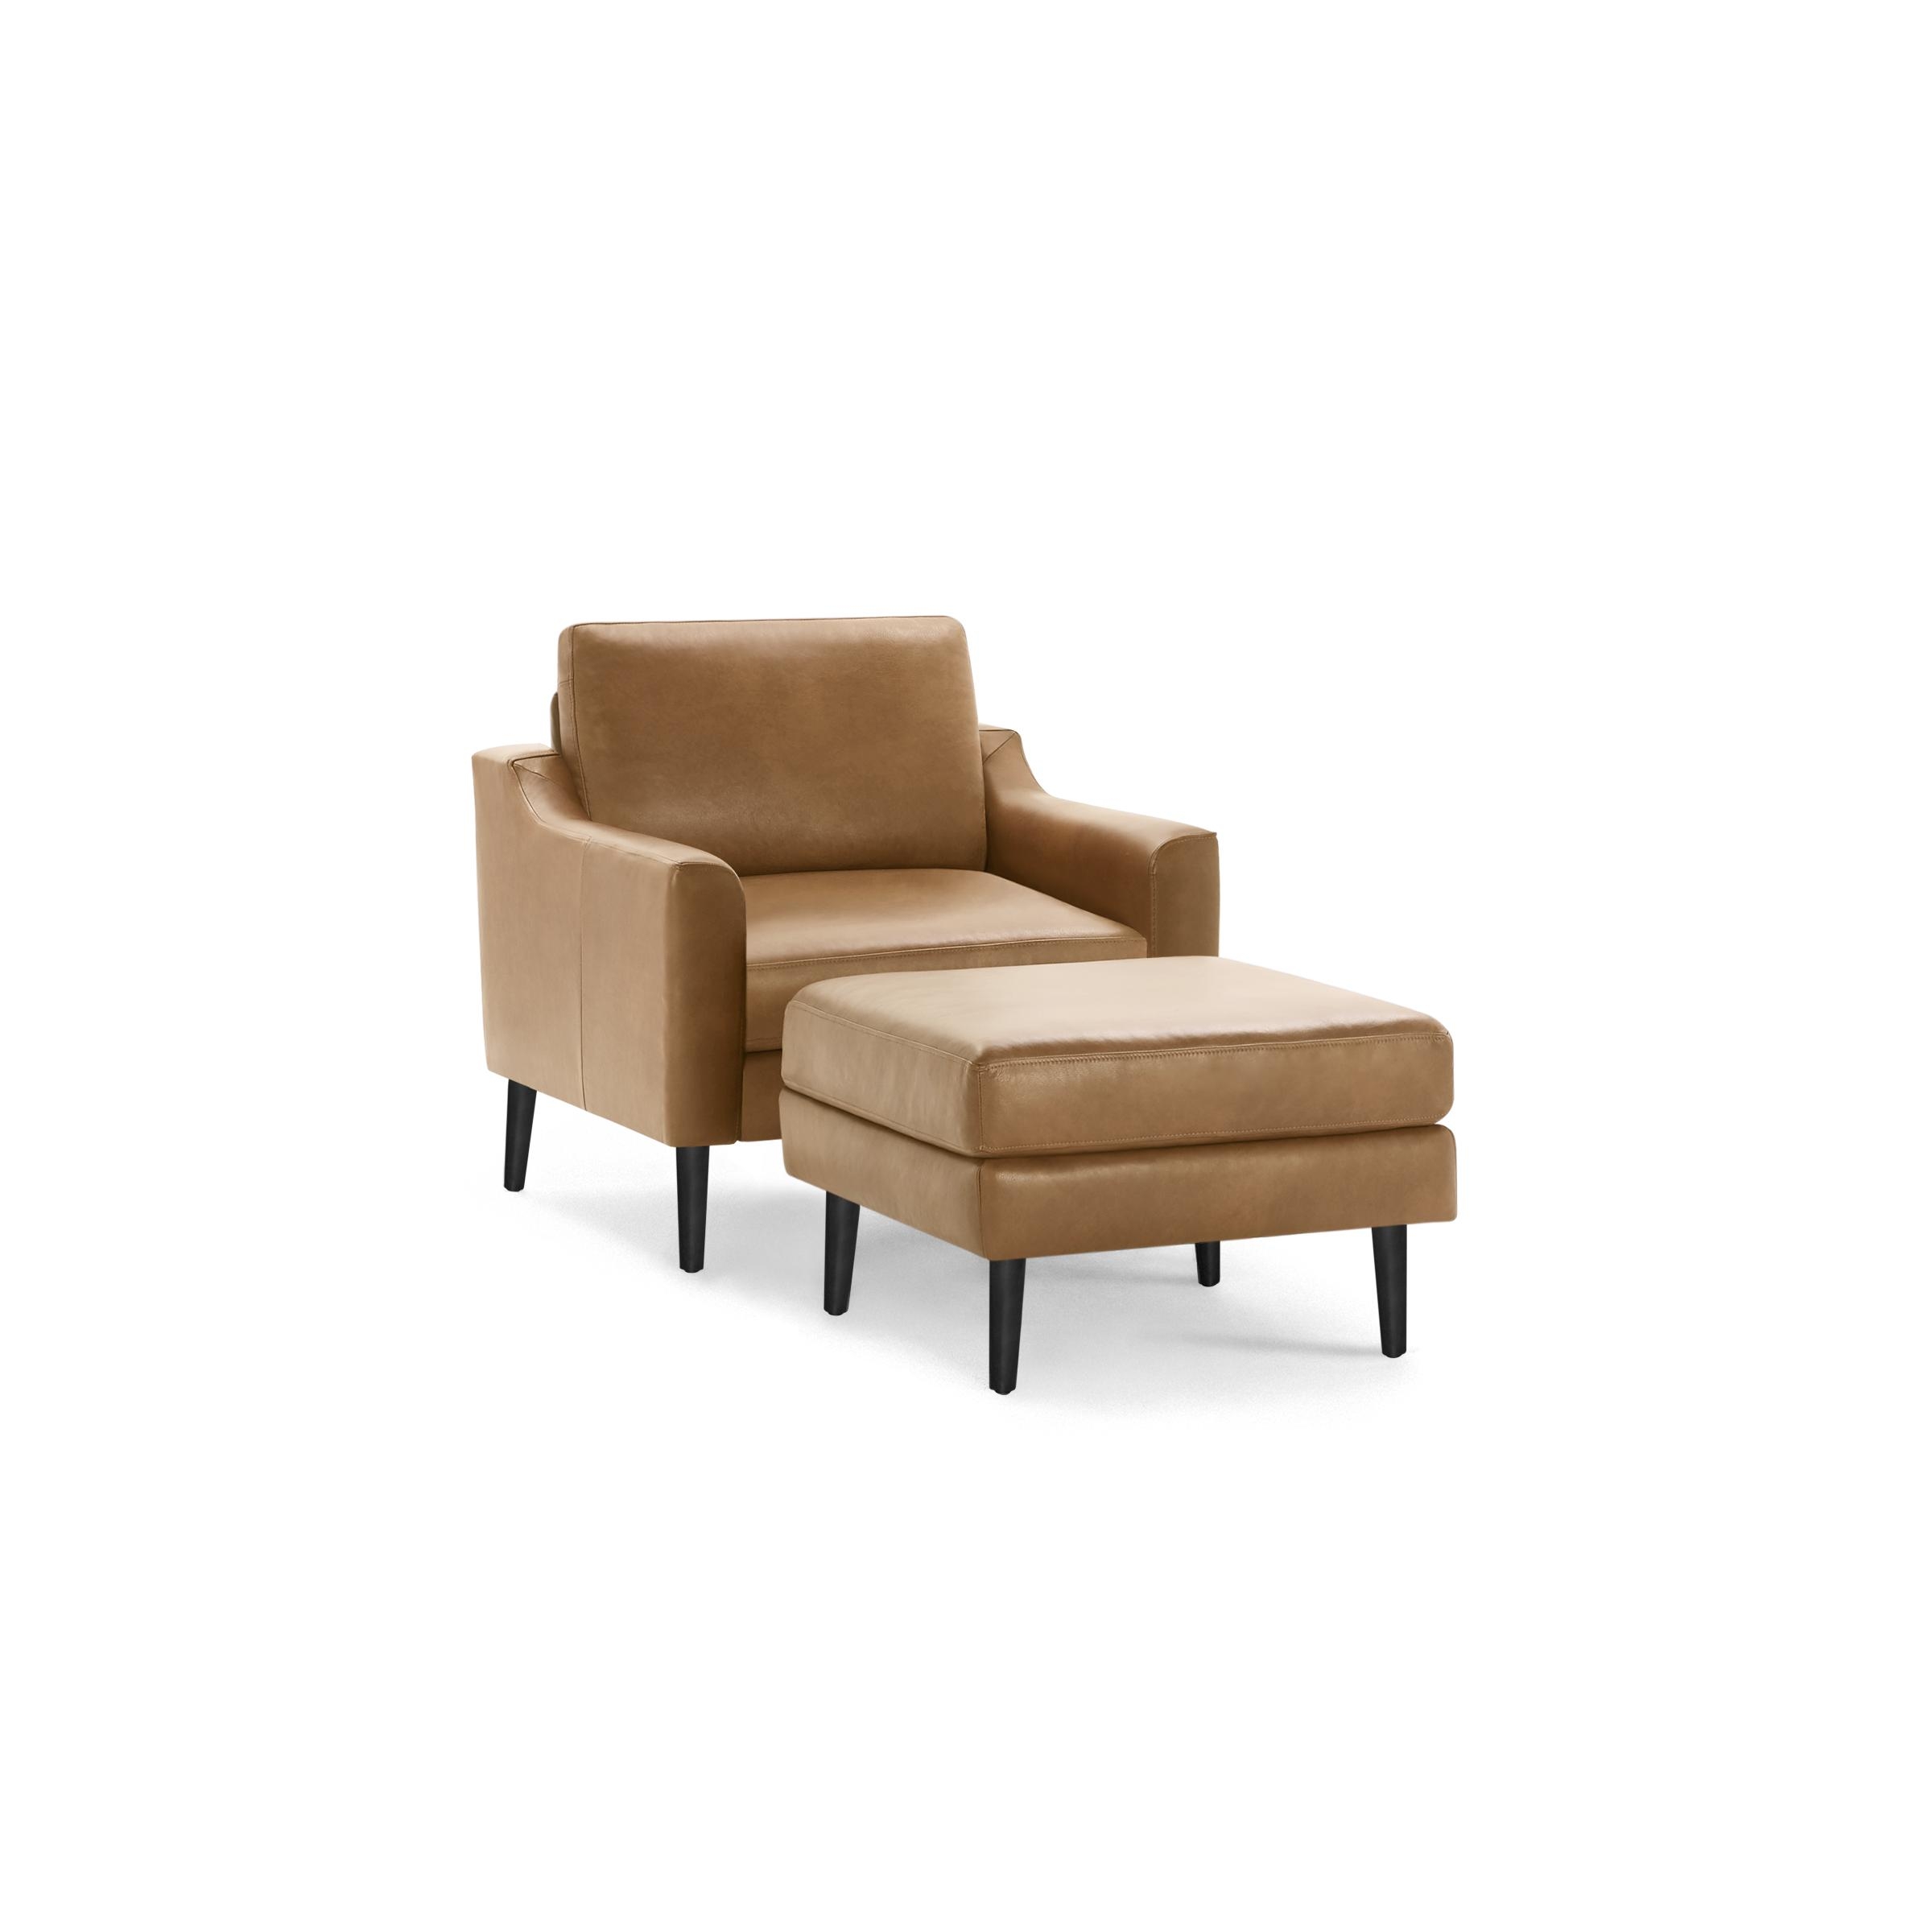 Nomad Leather Club Chair and Ottoman in Camel, Leg Finish: EbonyLegs - Image 0